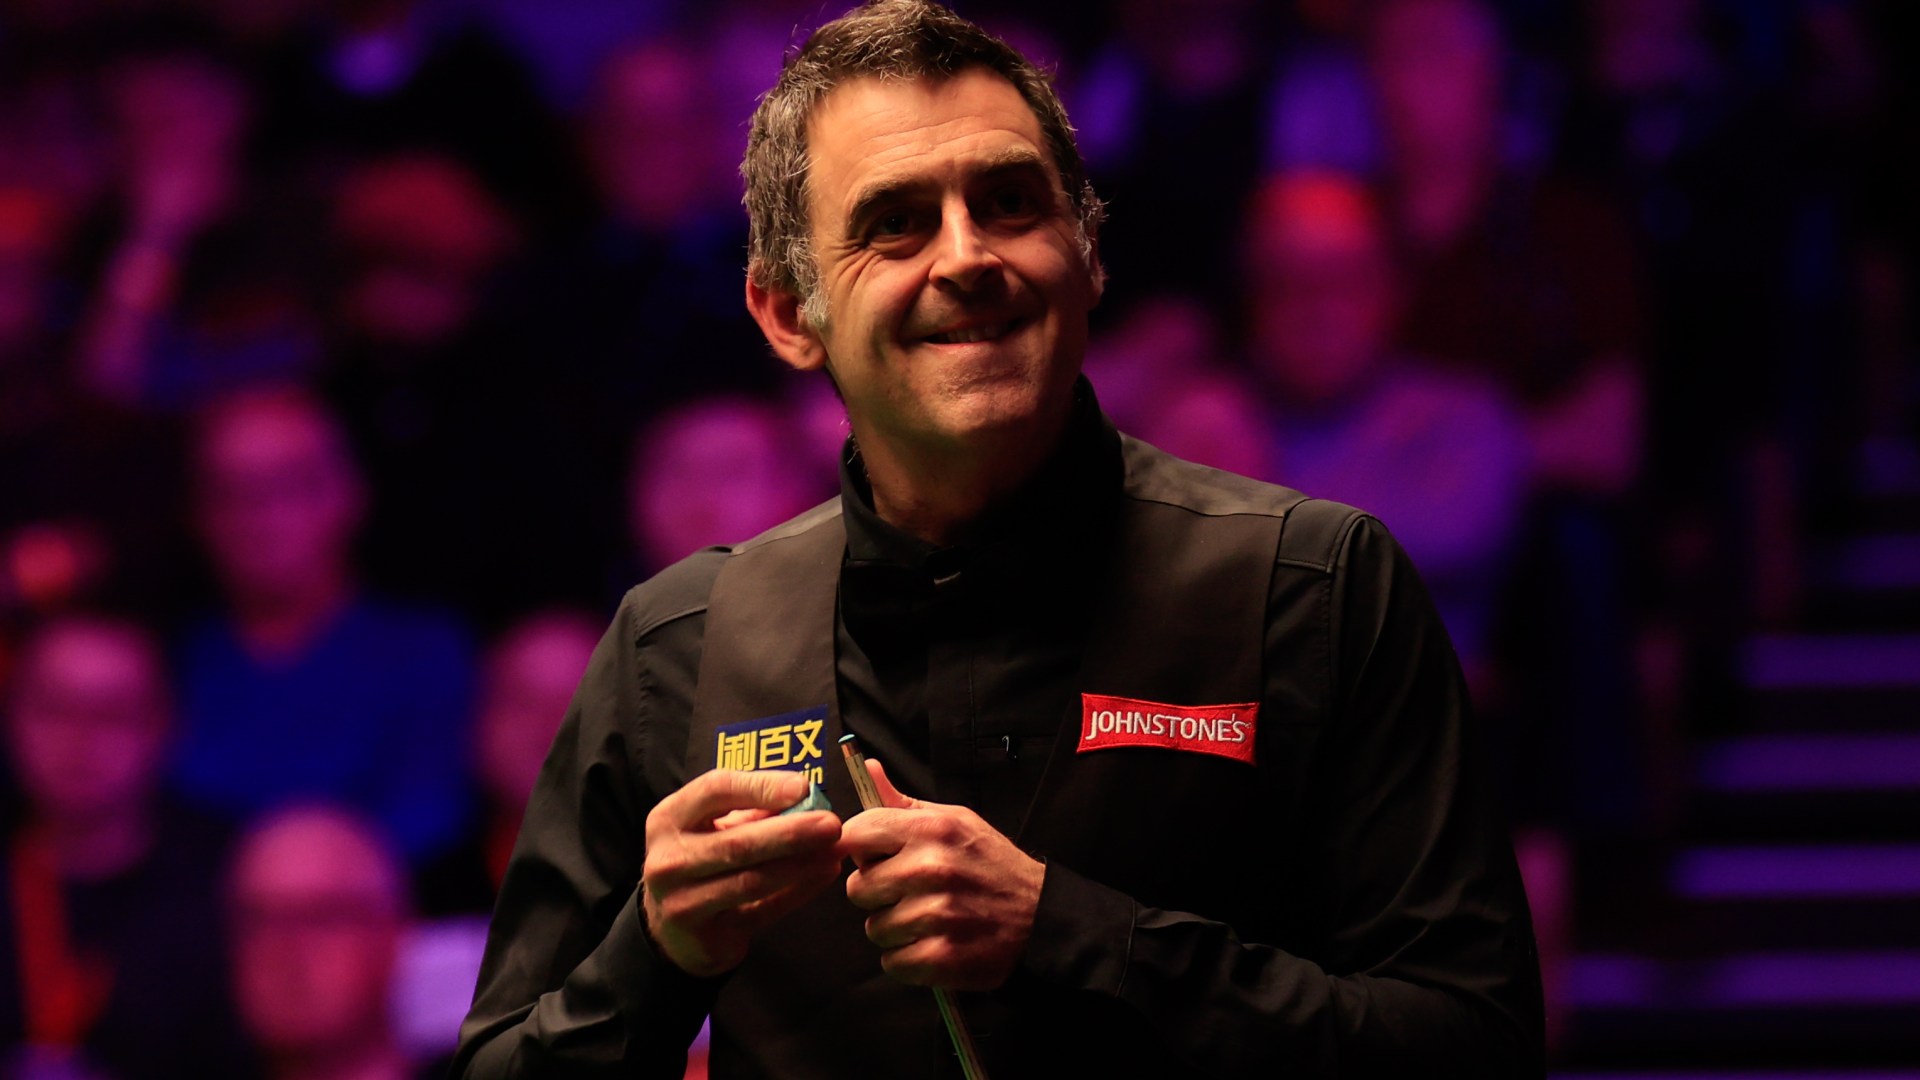 Ronnie O’Sullivan given bizarre gift alongside 250,000 prize money for winning Riyadh World Masters of Snooker [Video]